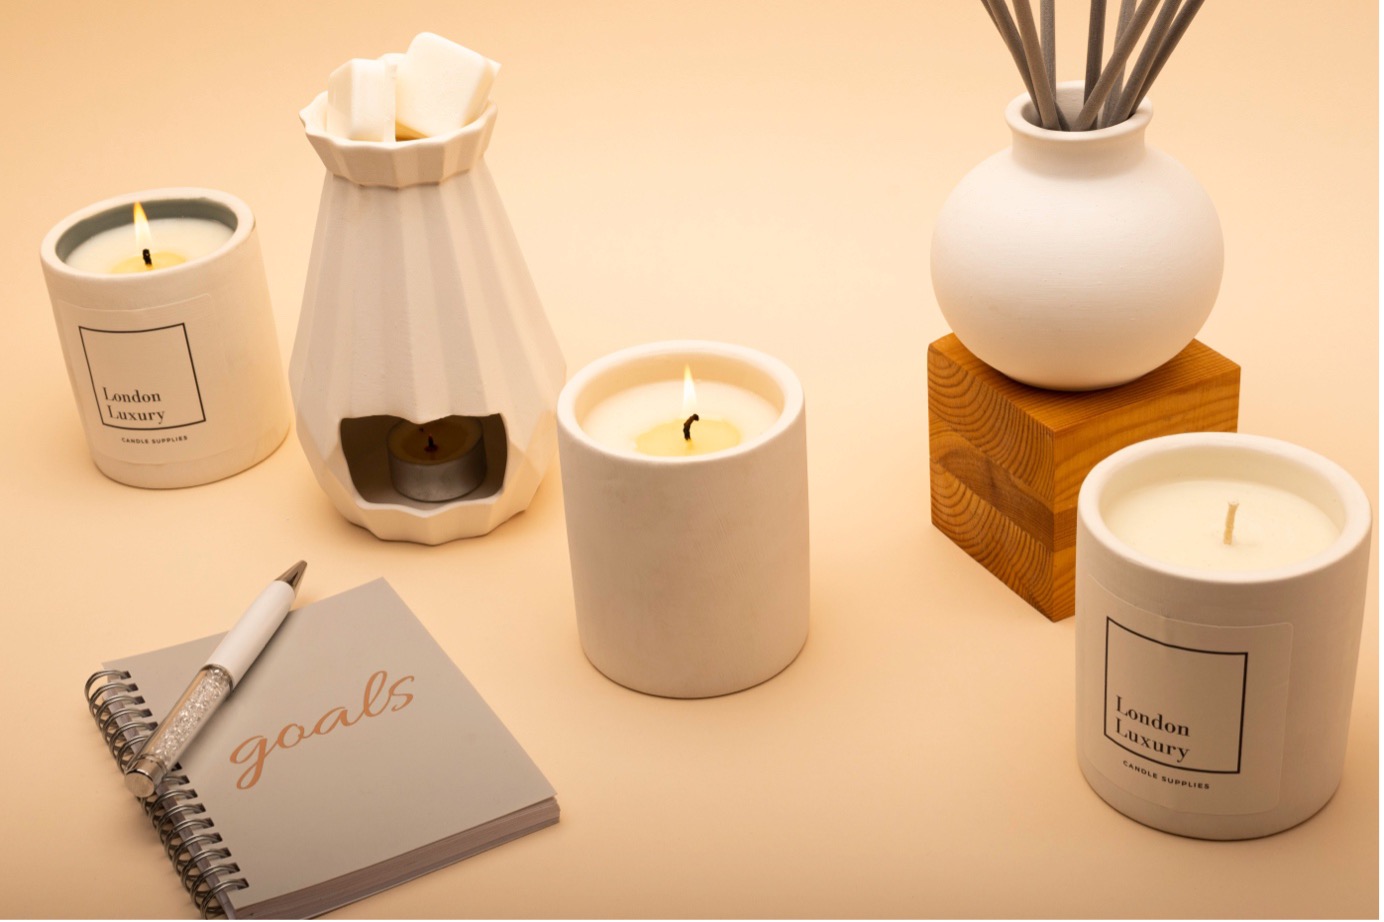 Ceramic range of jars, diffusers and wax melt burners, along with a 'Goals' notebook. 